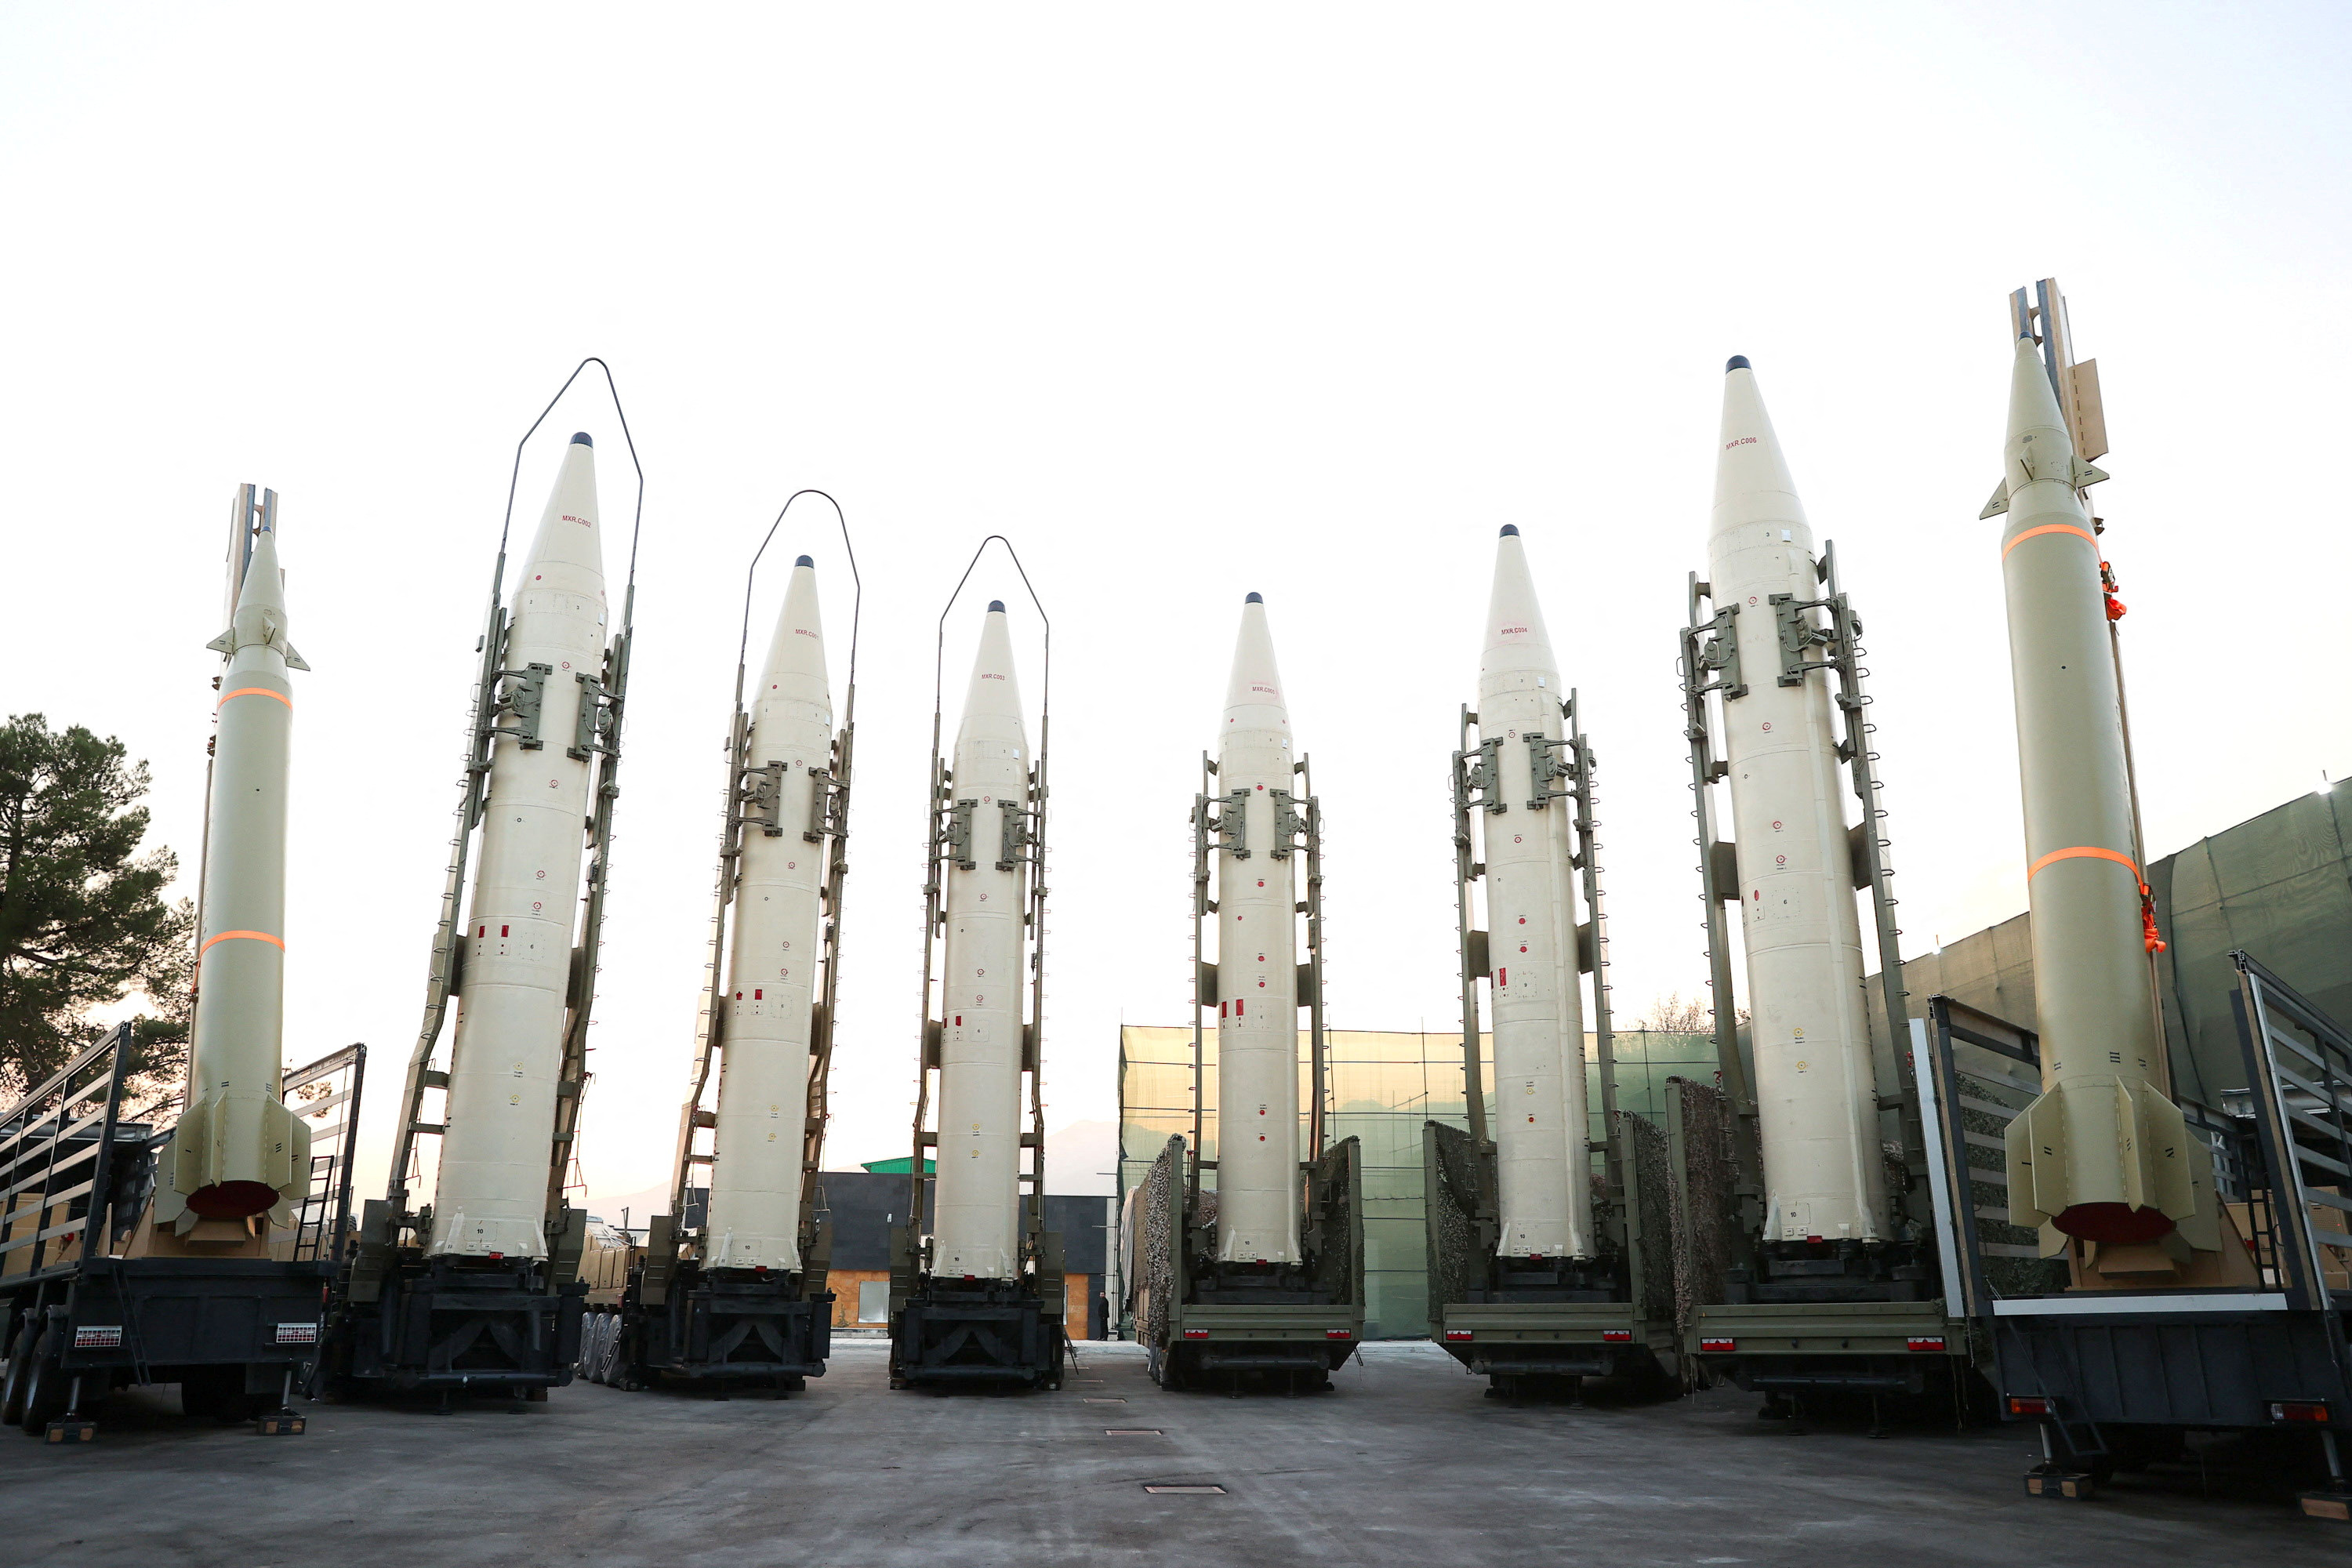 Iranian ballistic missiles are displayed during the ceremony of joining the Armed Forces, in Tehran